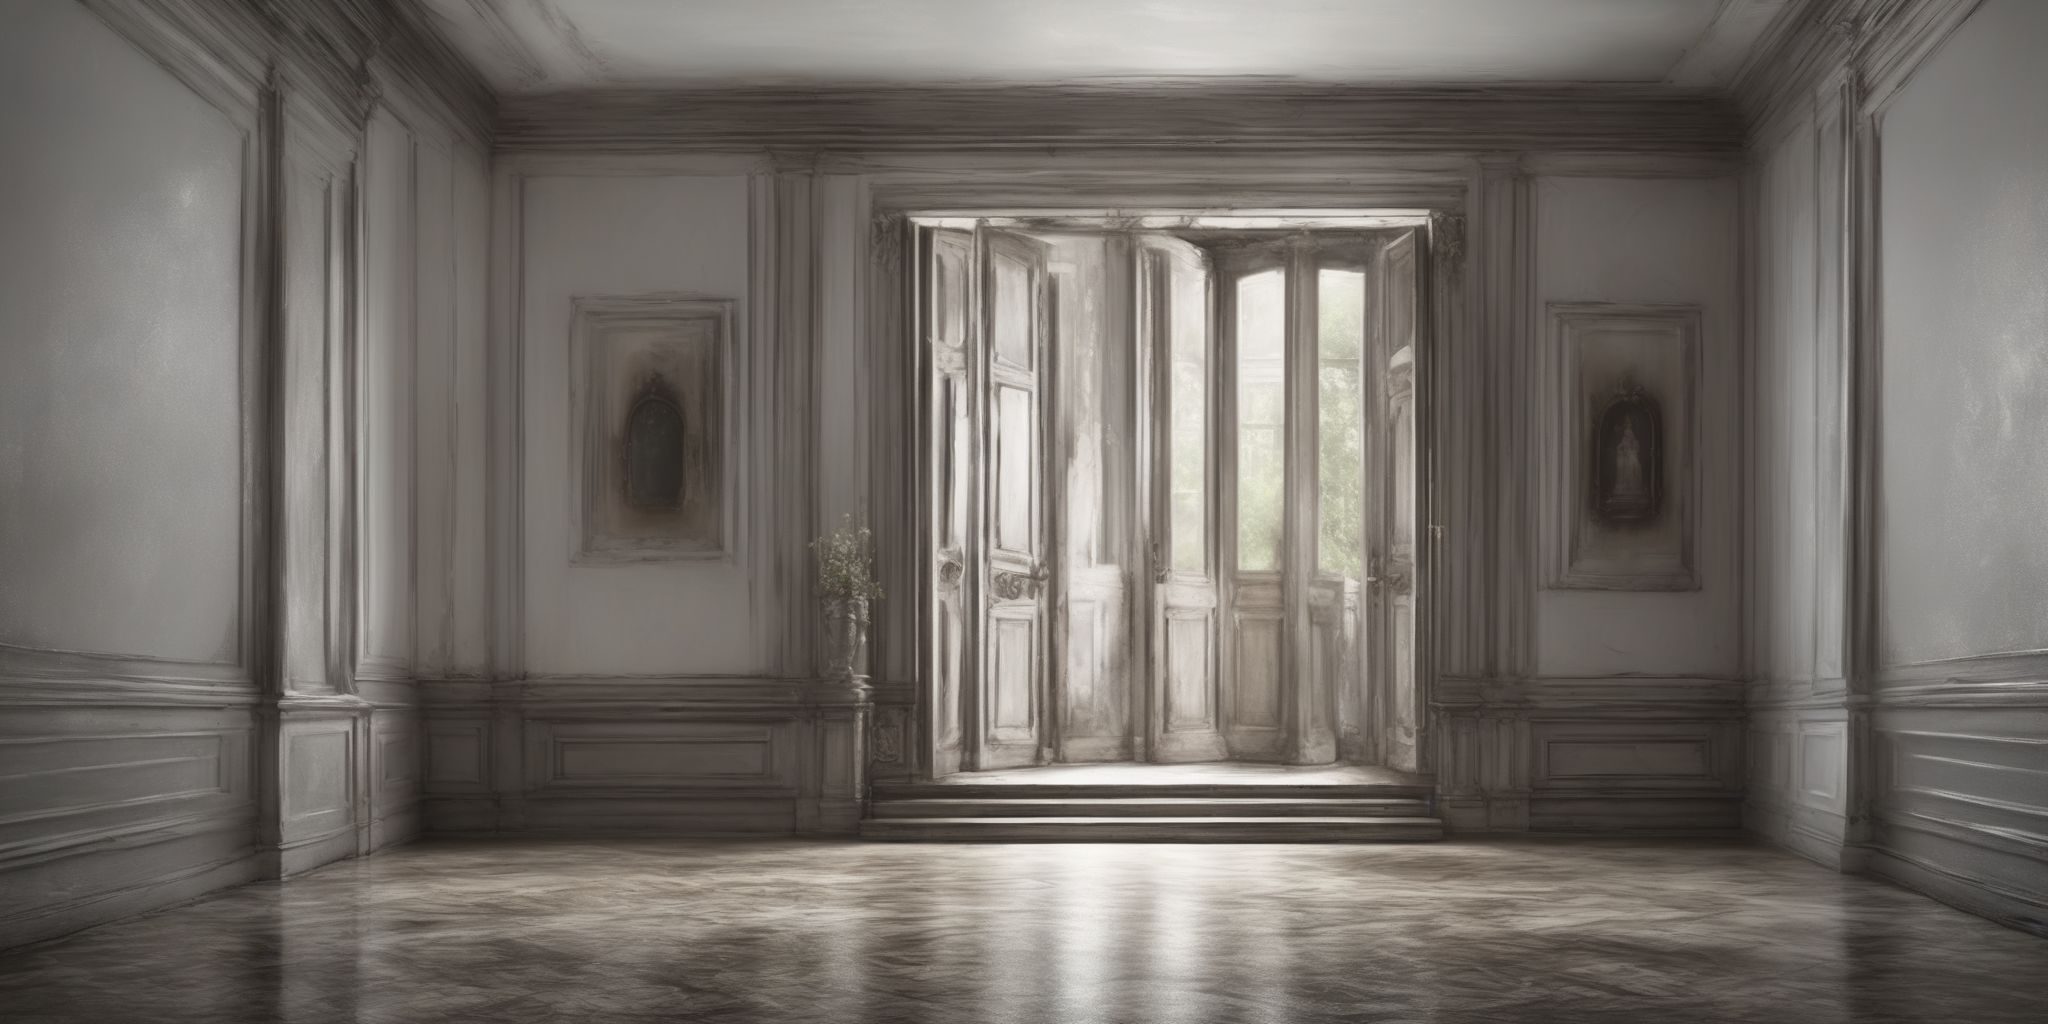 Threshold  in realistic, photographic style